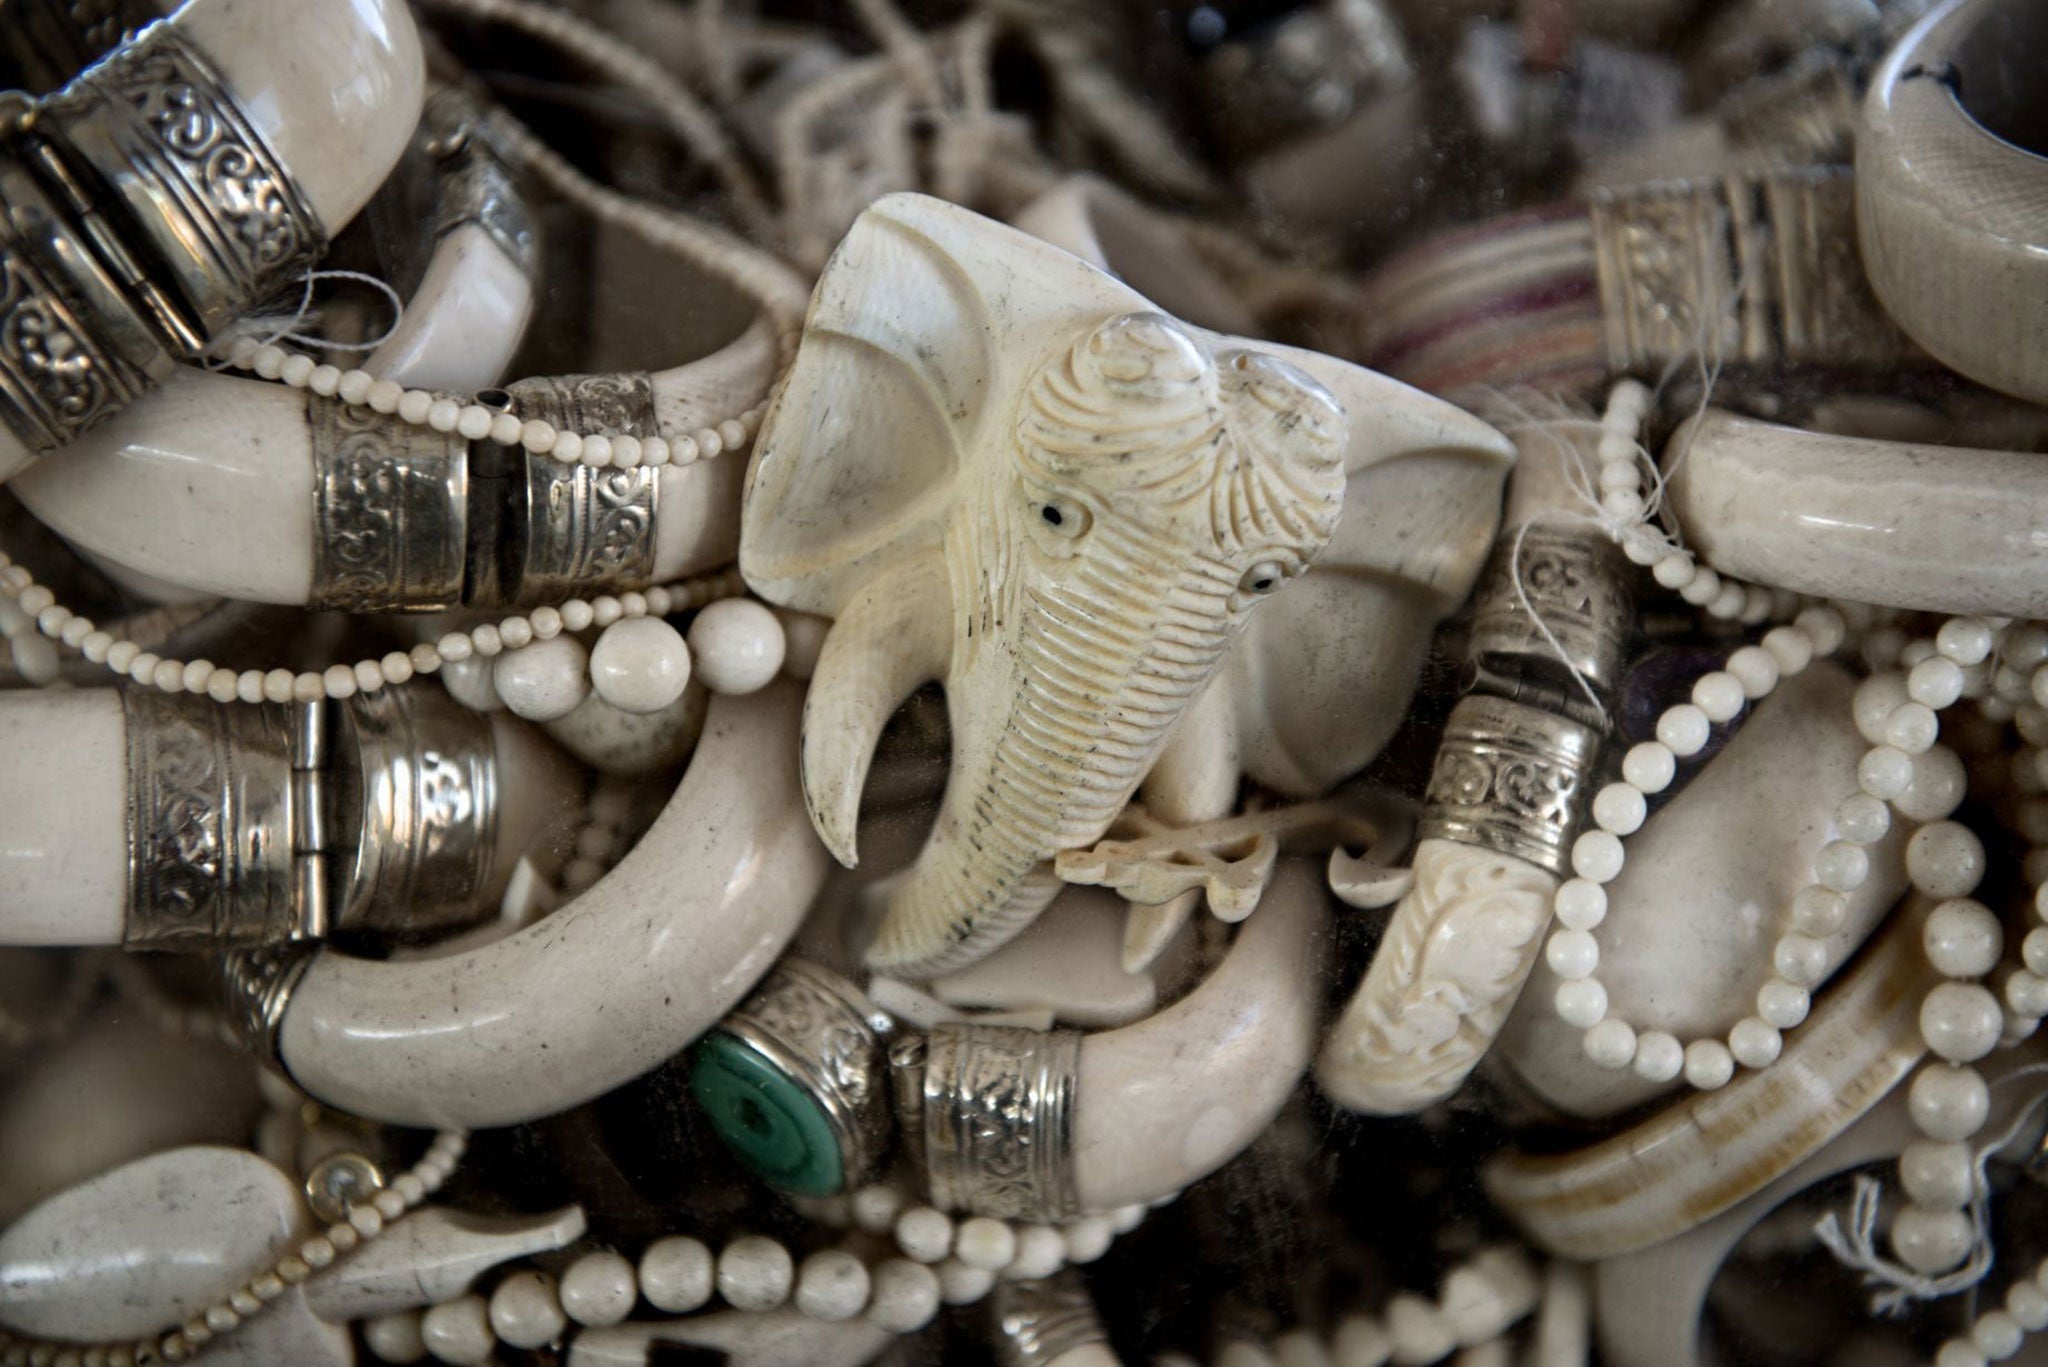 One of the boxes of seized ivory items